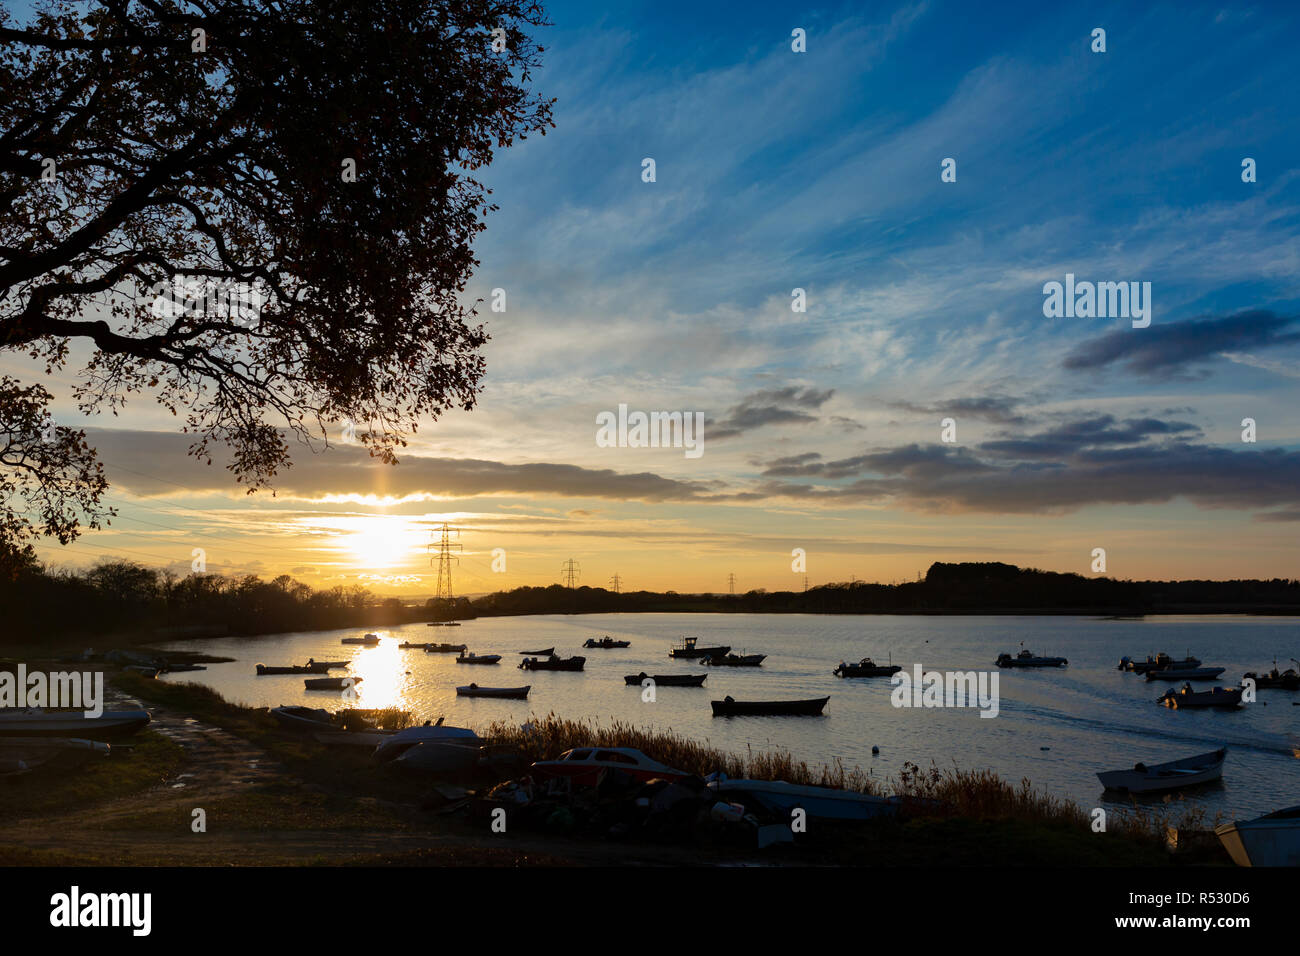 Landscape photograph of bay with many moored boats in sillhouette with sunset in background. Stock Photo